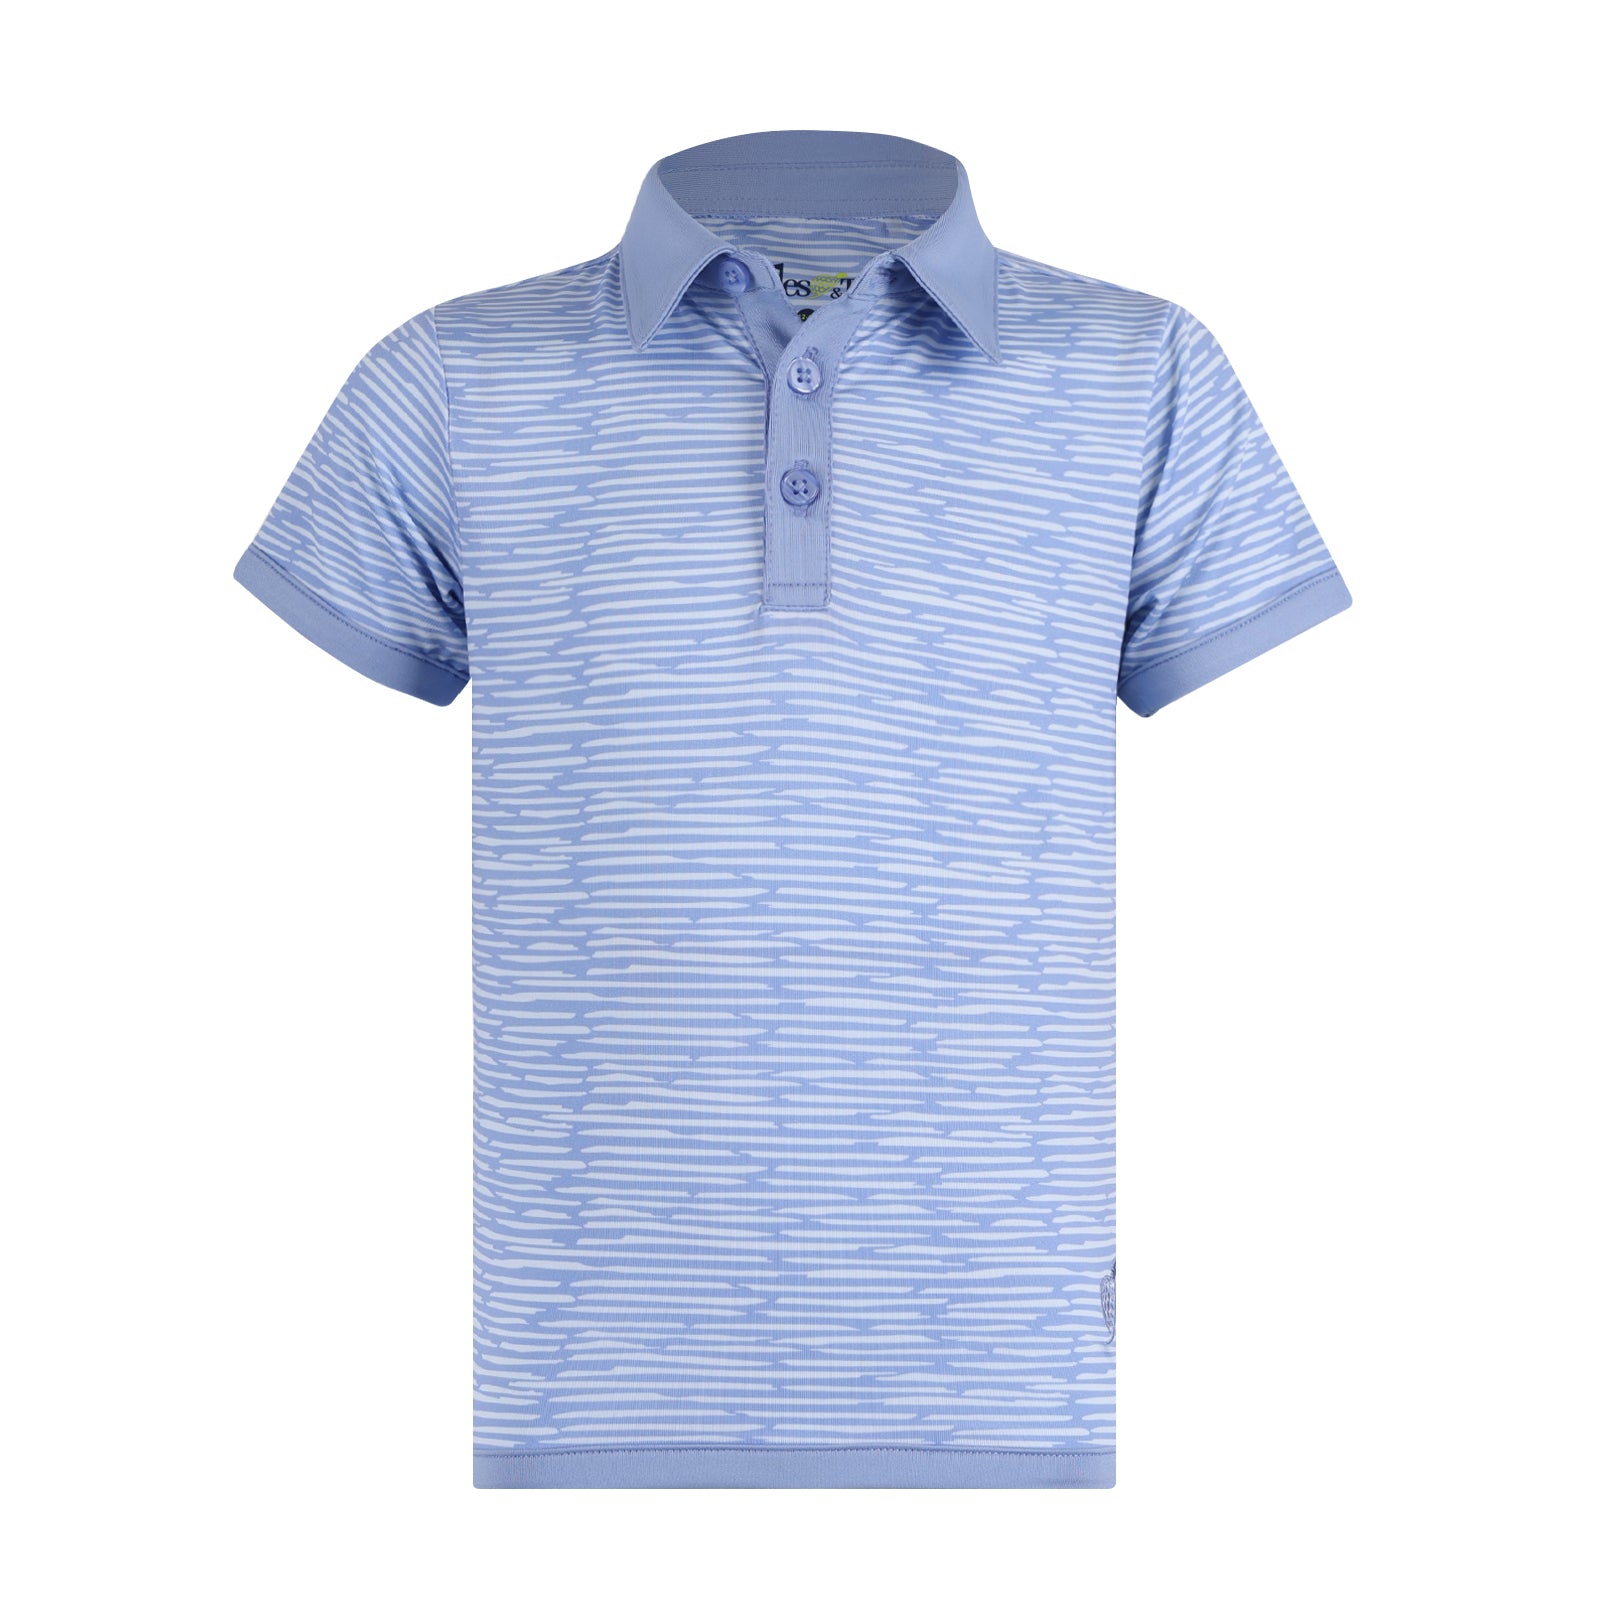 Performance Polo (Capri, Very Berry and Olympian Blue - Limited